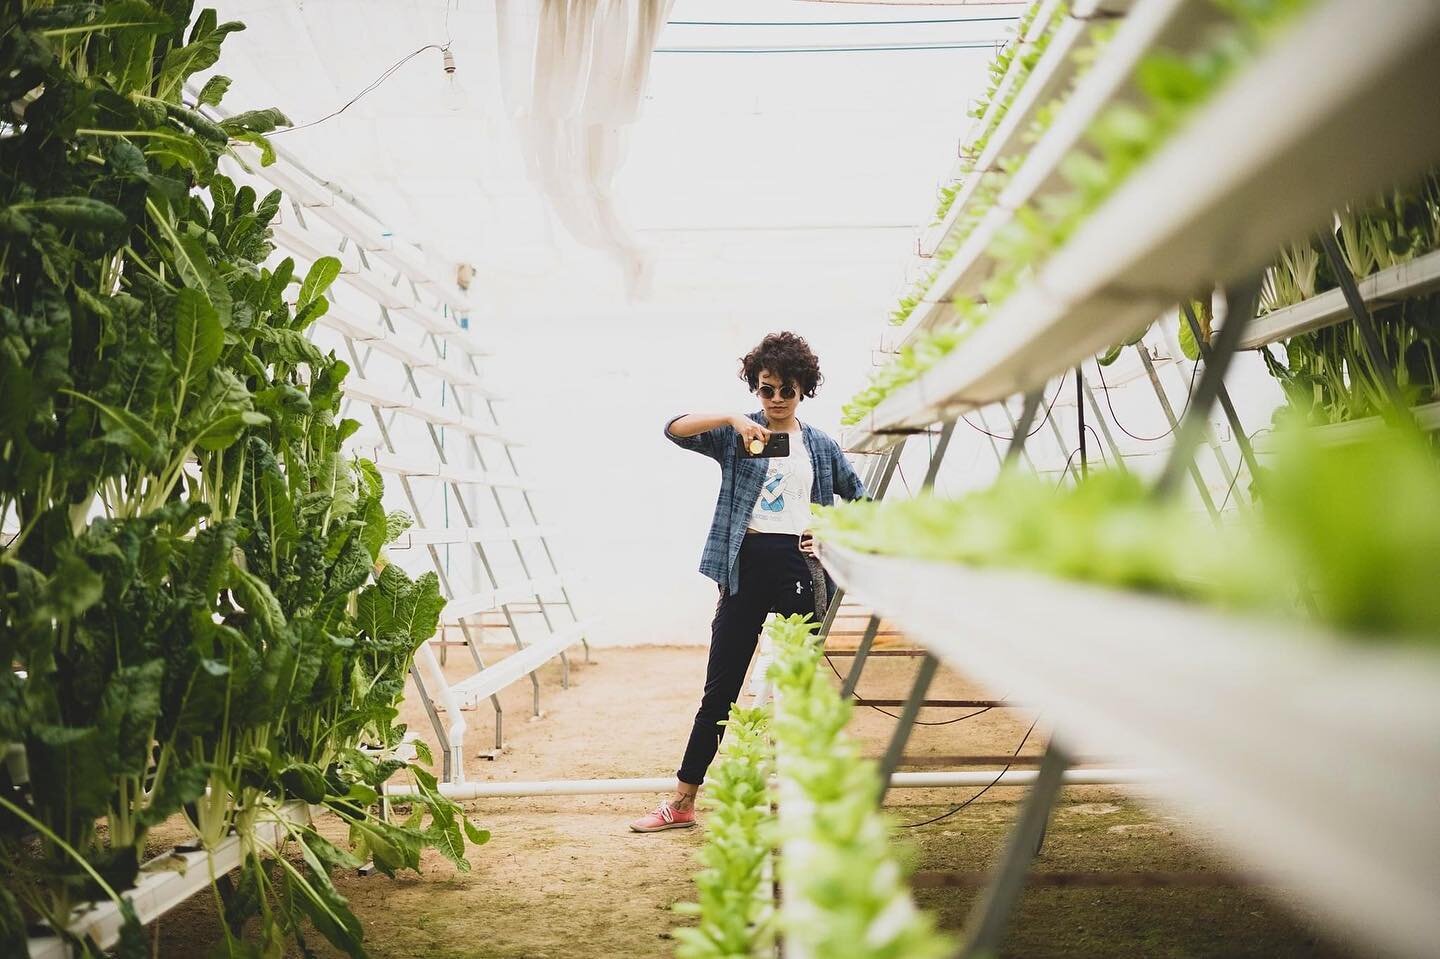 We're hosting a virtual workshop on Hydroponics 🍃 on Saturday, May 15 at 11am MST. Join us and learn more on this exciting form of gardening! 🪴 Register today to reserve your spot. ⬆️ Link is in the bio! ⬆️ 
.
.
.
.

#virtual #virtualgardening #gar